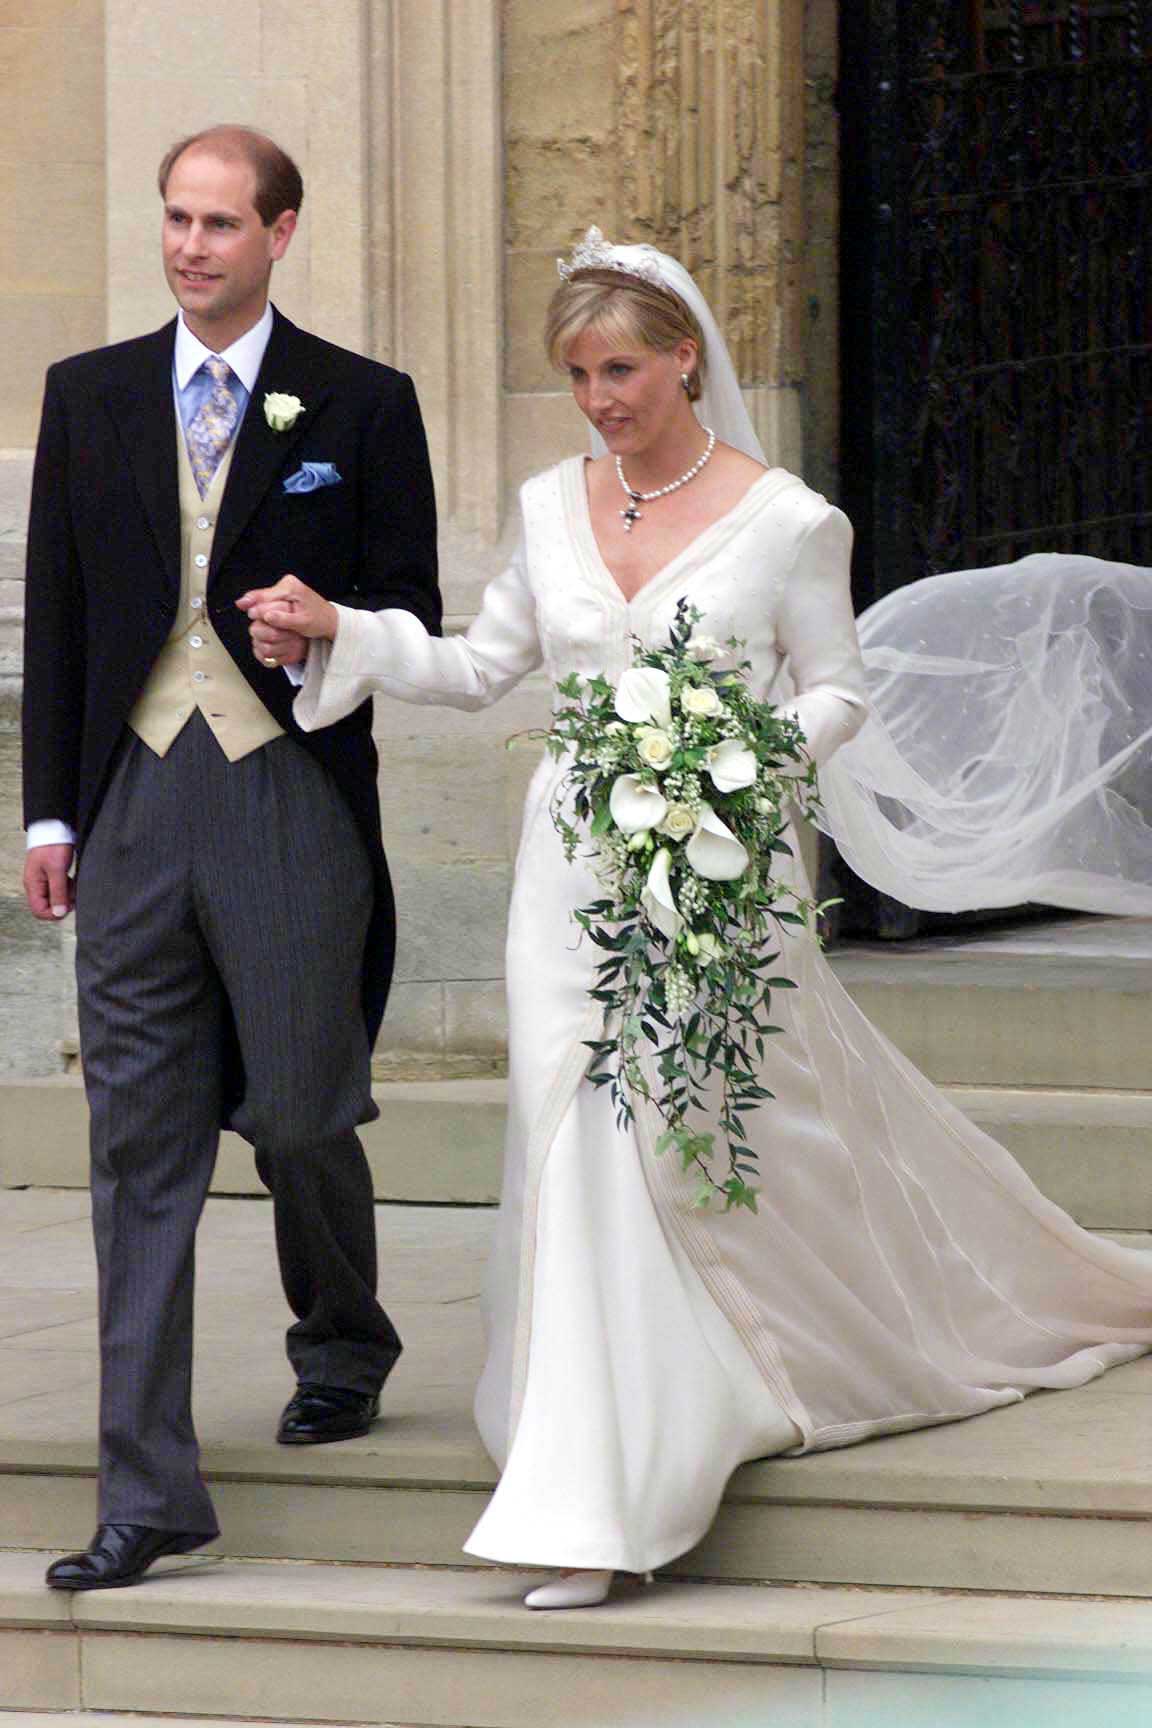 The Earl and Countess of Wessex on their wedding day on June 19, 1999.